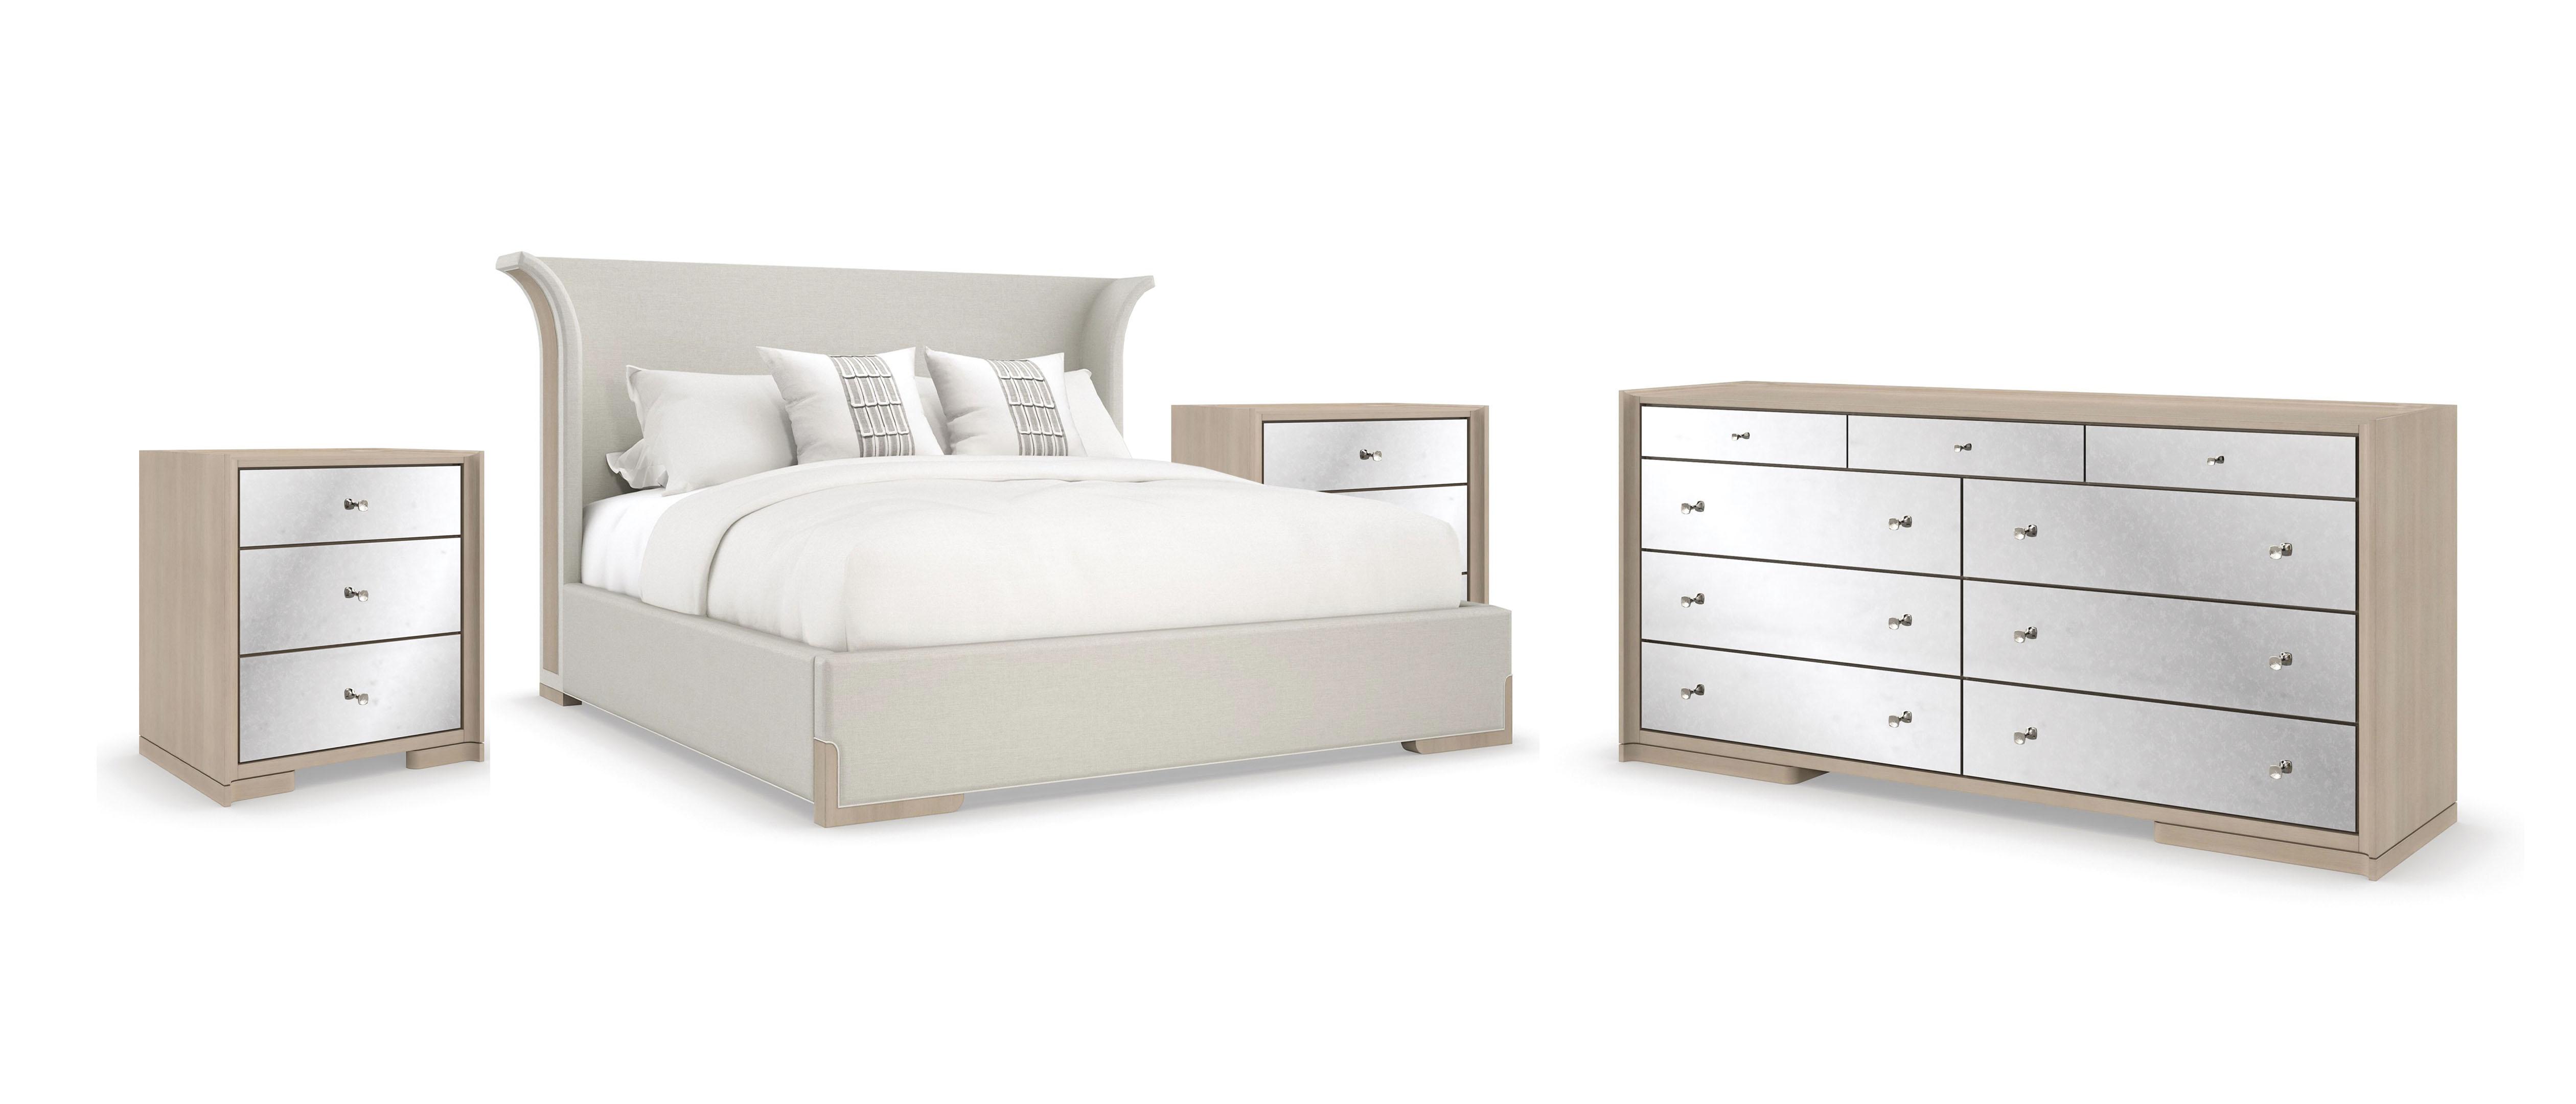 Contemporary Platform Bedroom Set BEAUTY SLEEP-KING / IN YOUR DREAMS / LIVING THE DREAM CLA-021-122-Set-4 in Light Gray 